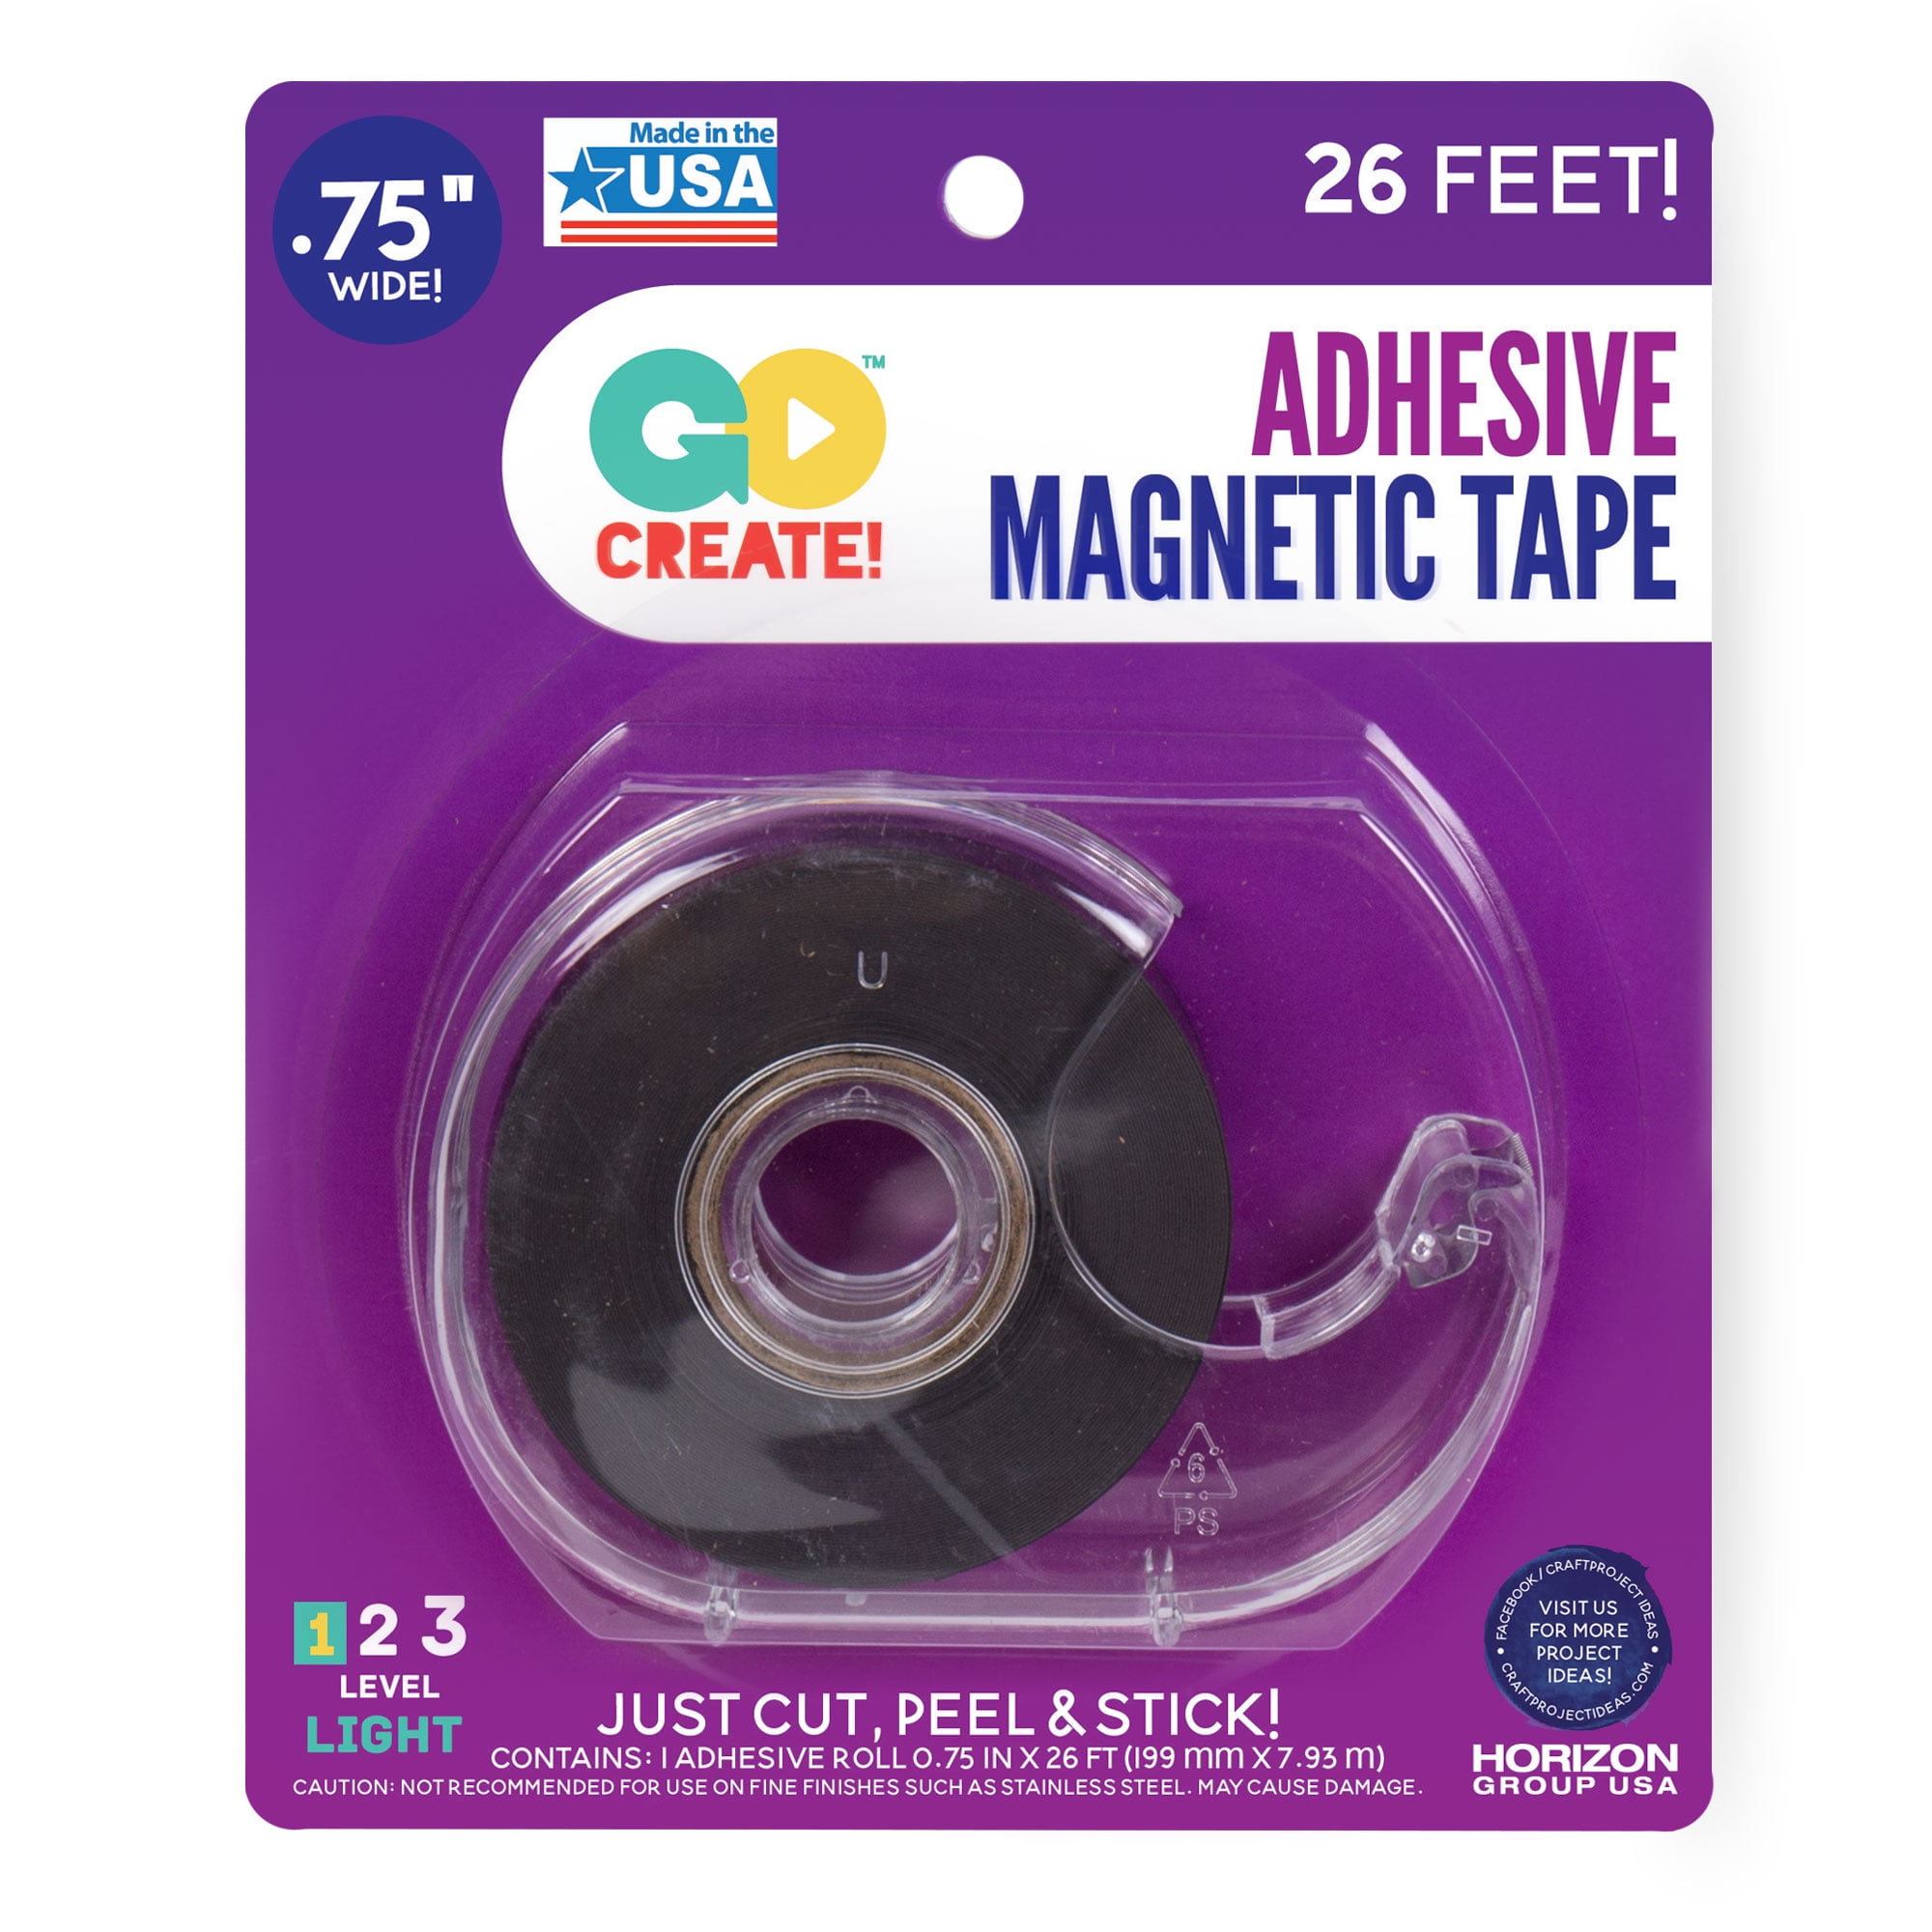 The Tape Thing magnetic tape dispenser